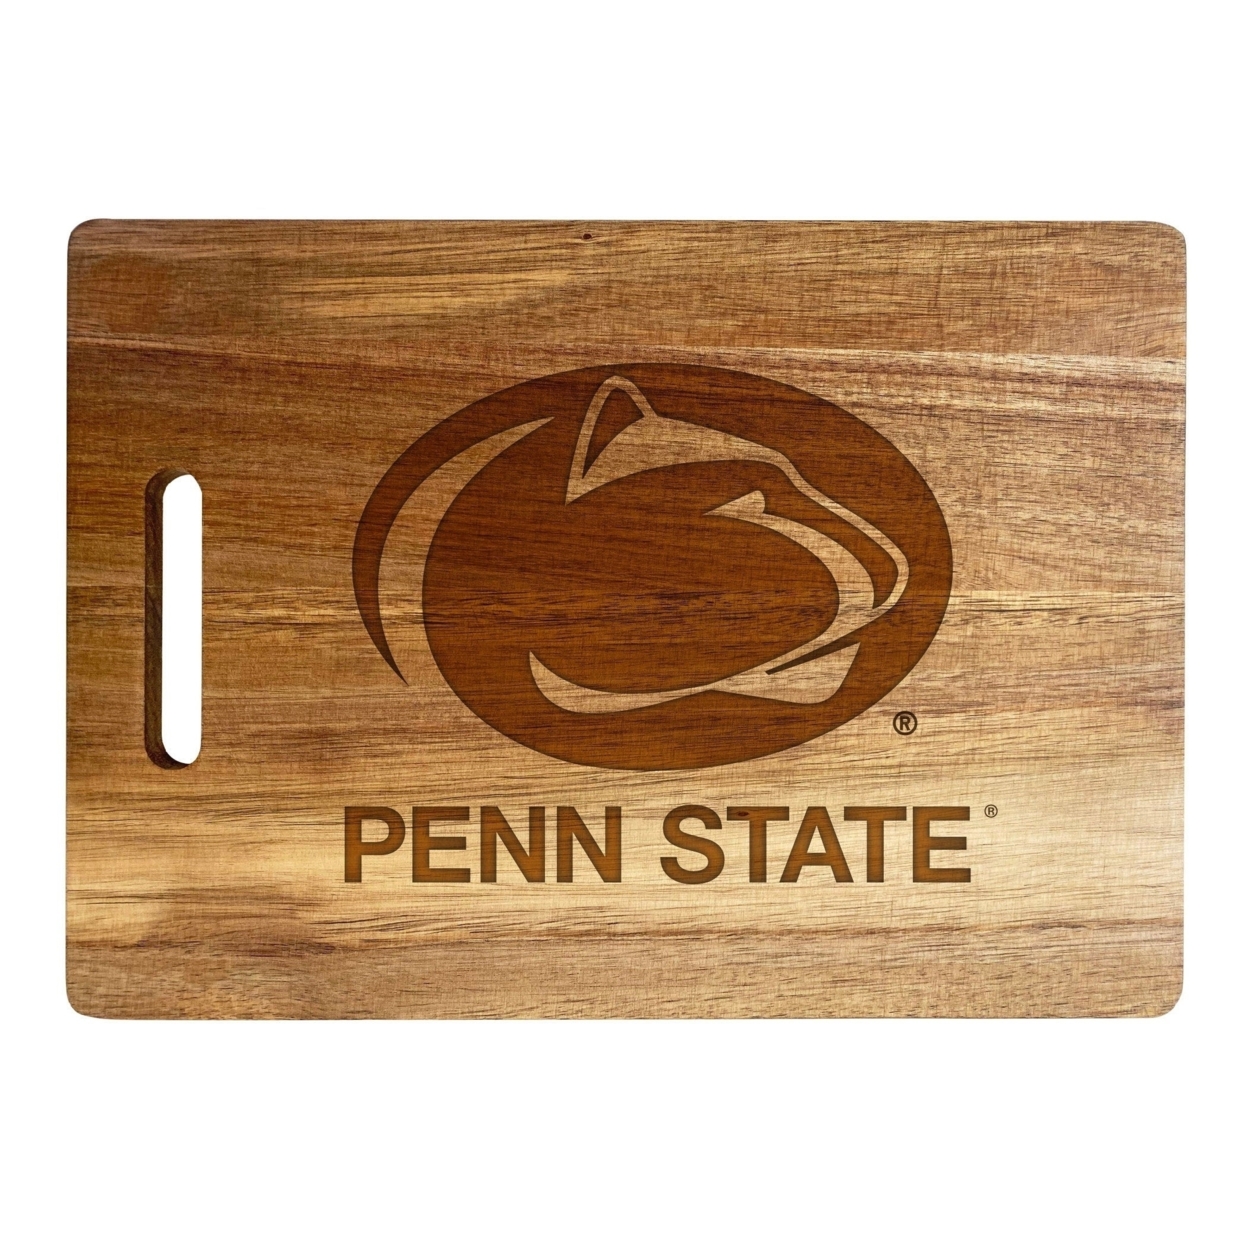 Penn State Nittany Lions Engraved Wooden Cutting Board 10 X 14 Acacia Wood - Large Engraving